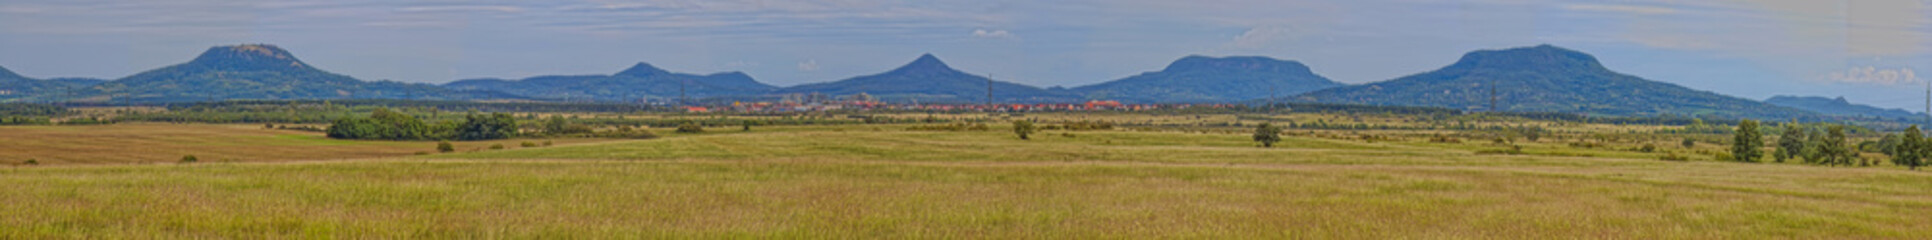 Panoramic landscape from volcanoes in Hungary